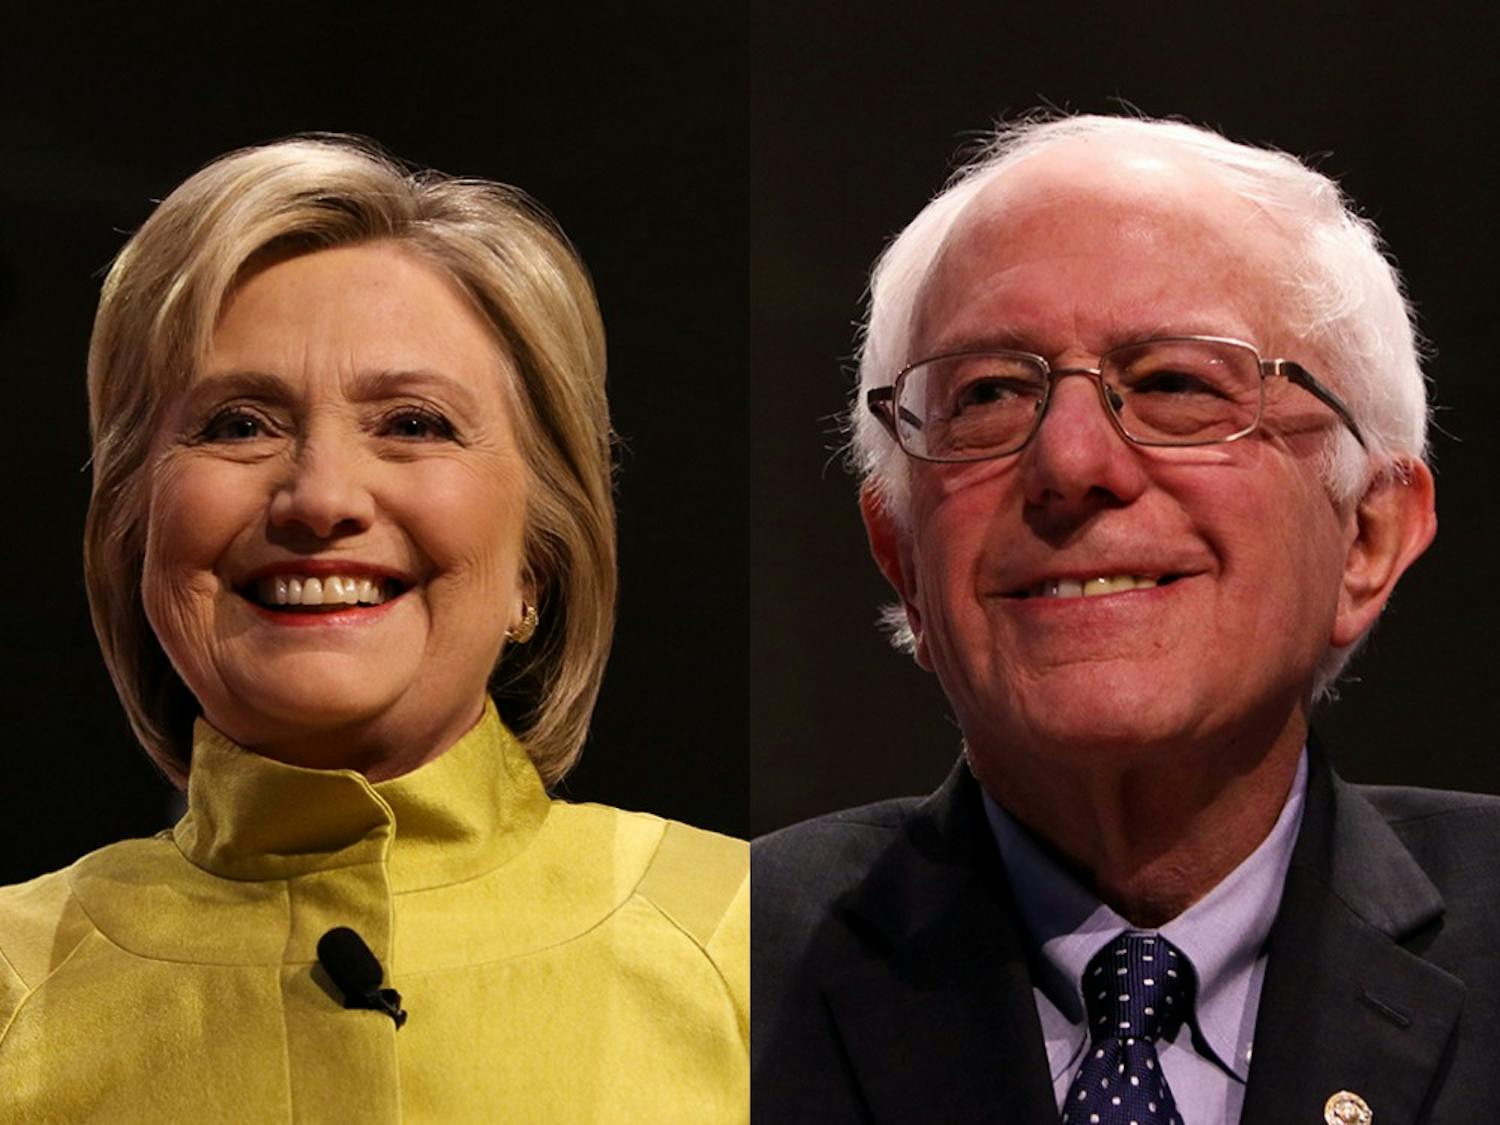 Democratic presidential candidates Hillary Clinton and Bernie Sanders squared off in the sixth primary debate Thursday at the University of Wisconsin-Milwaukee.